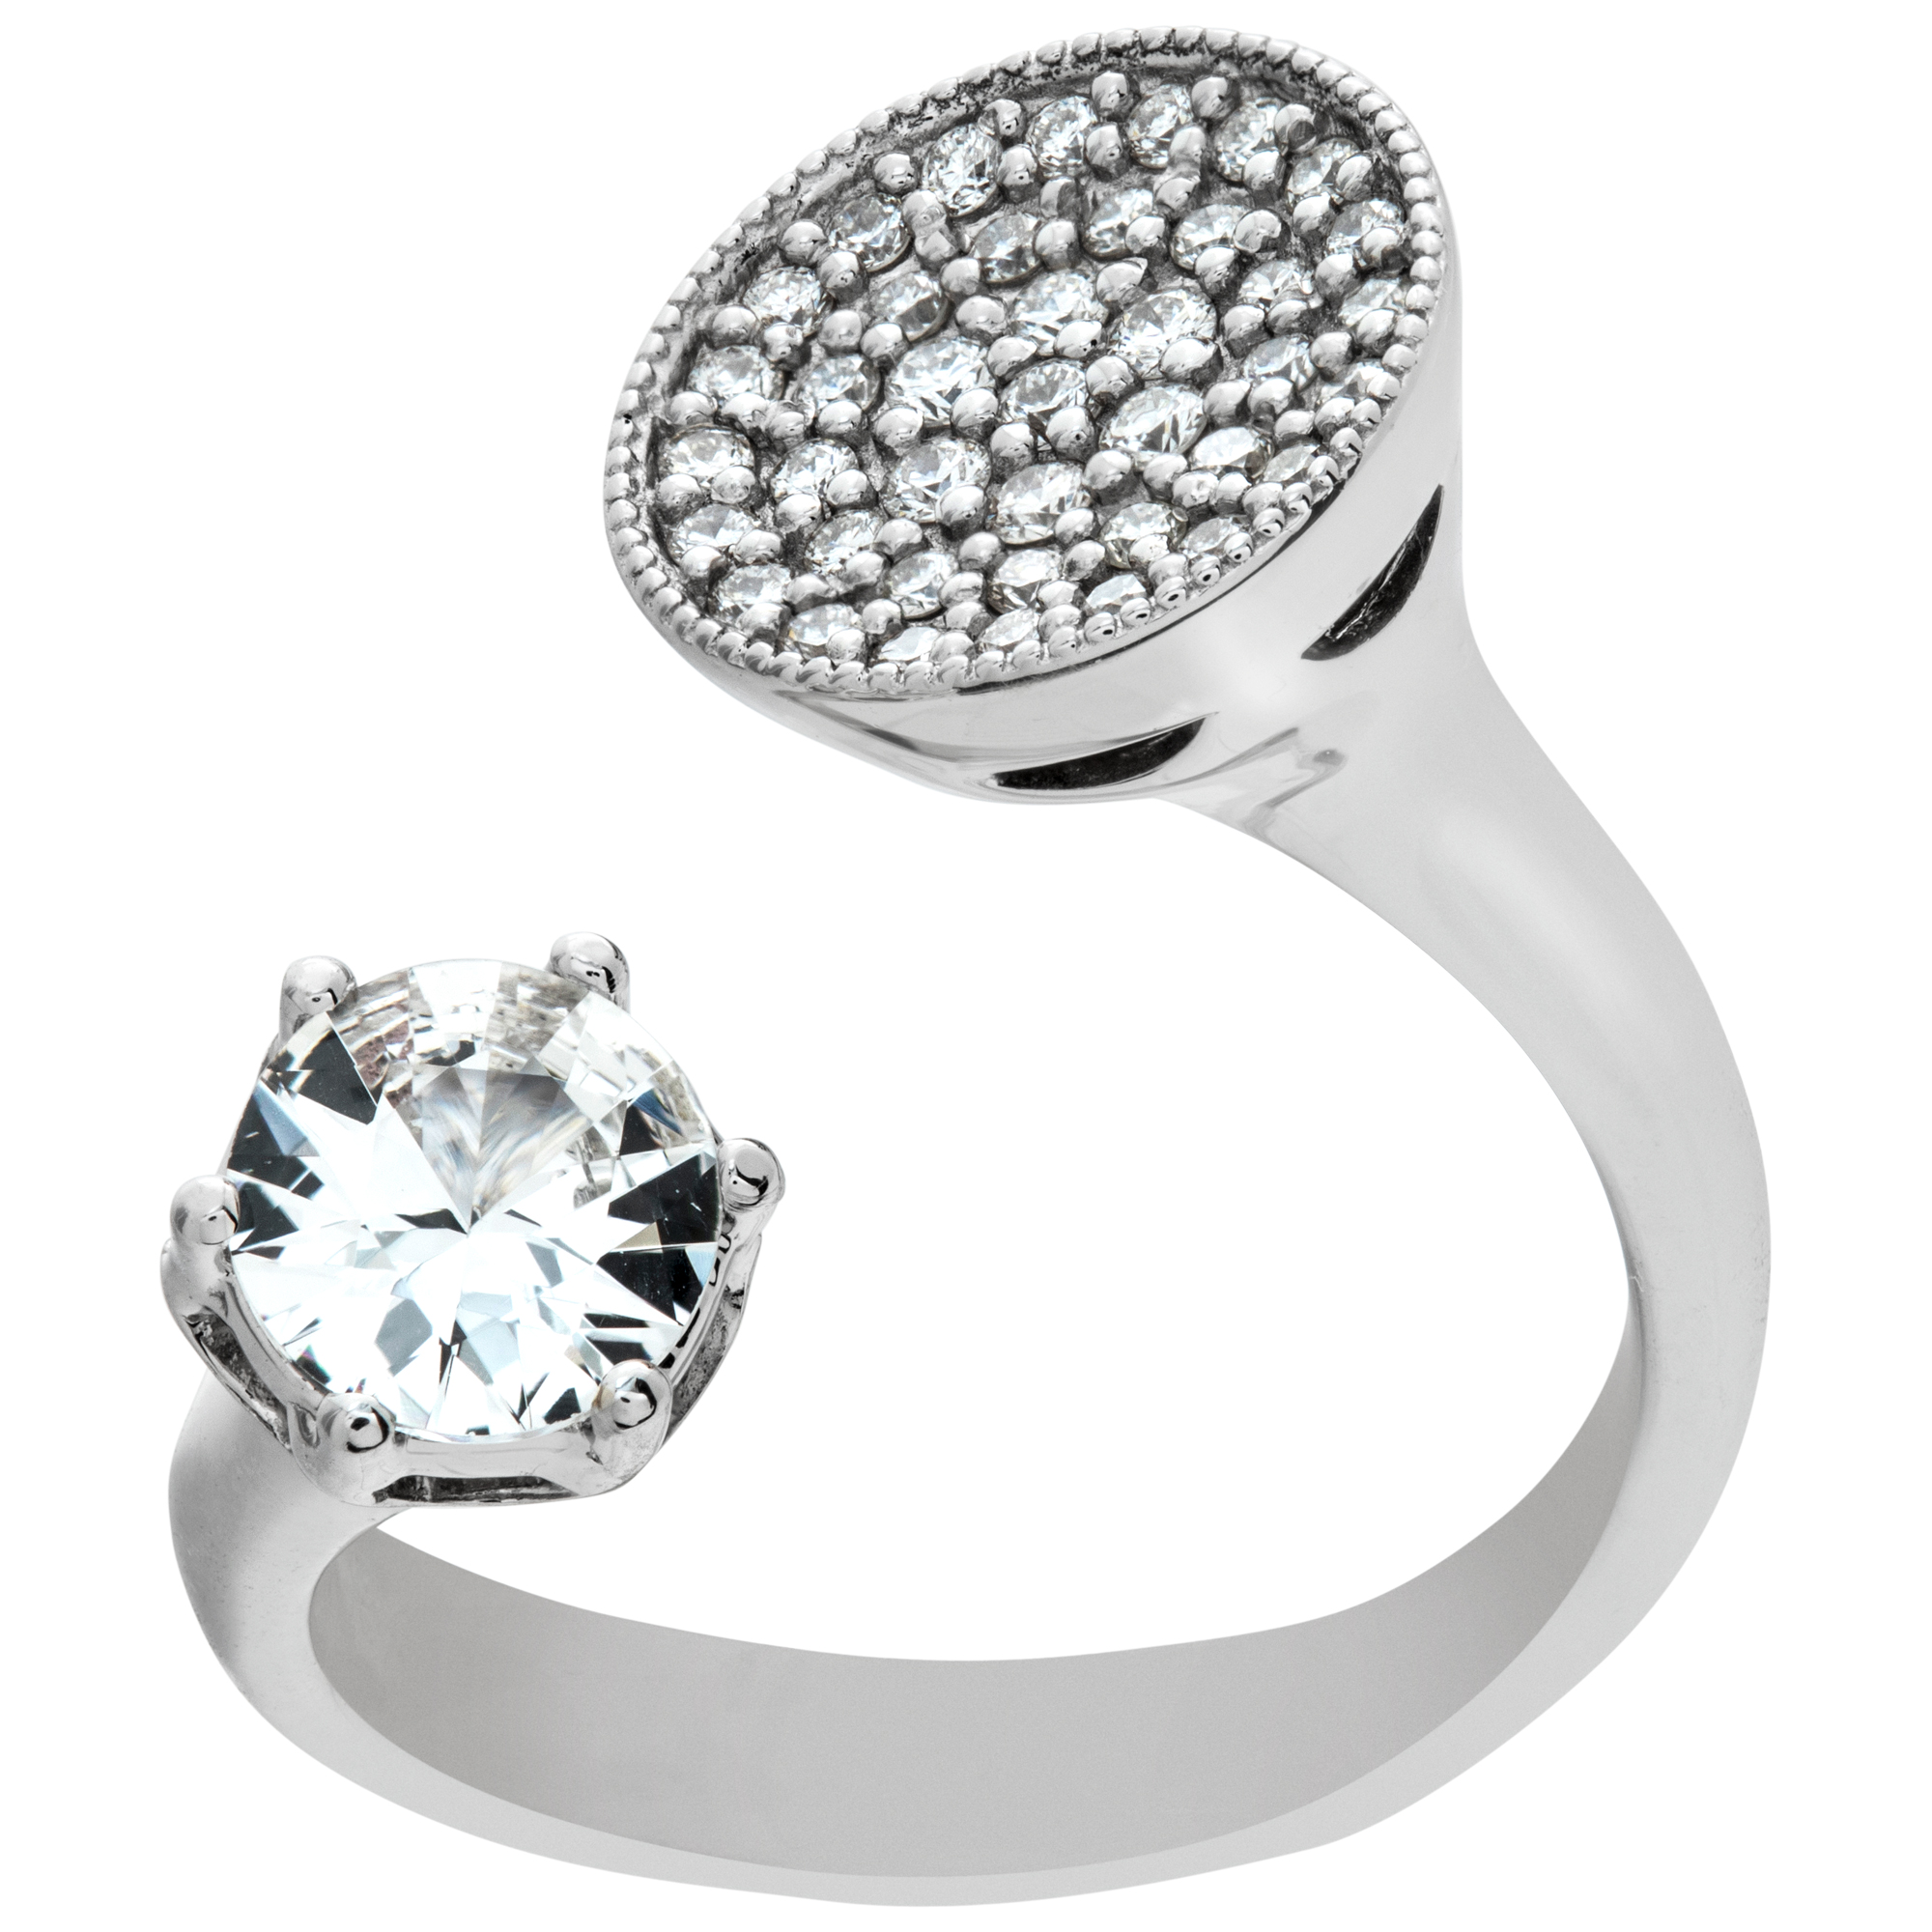 Pave Diamond and white sapphire ring set in 18k white gold. Size 5.75 image 1